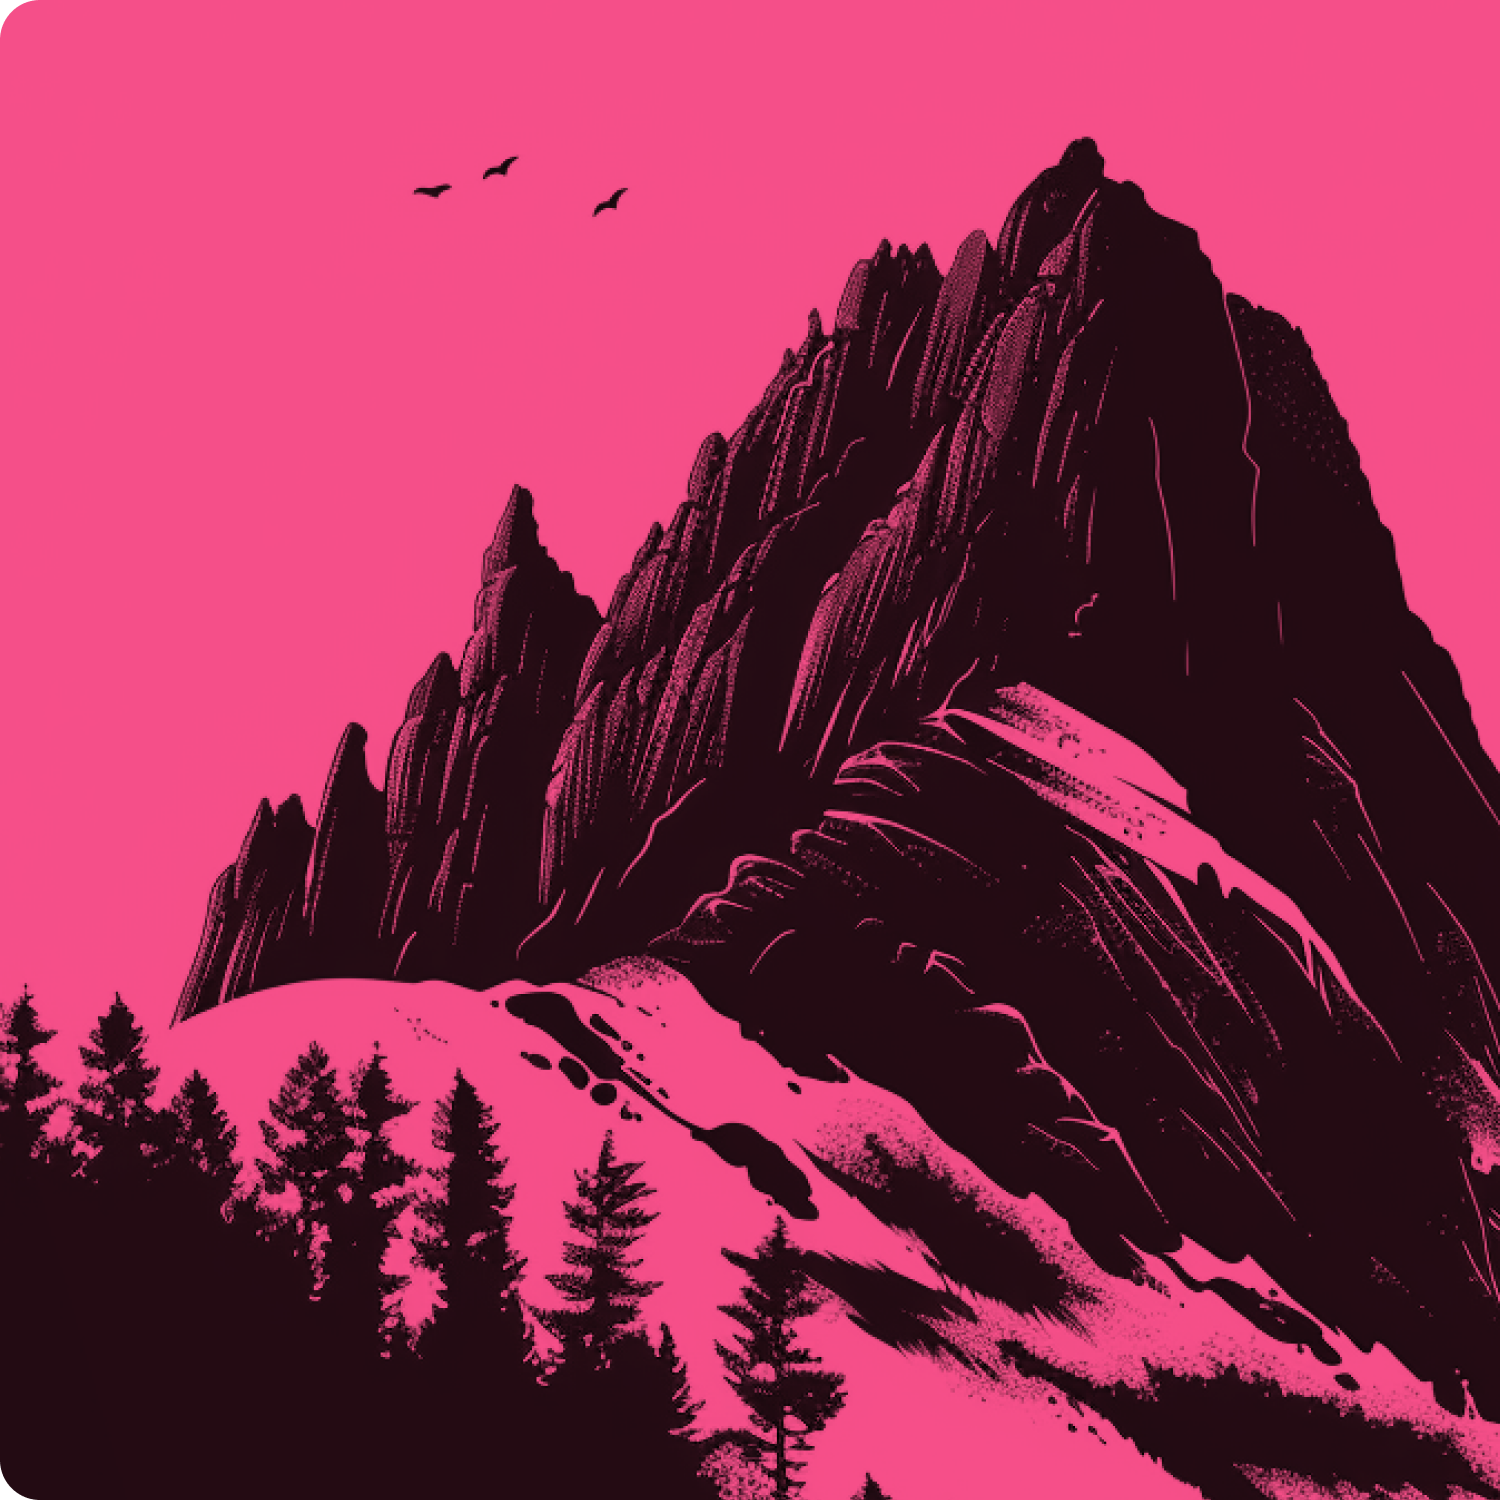 A painting of a mountain with a pink background